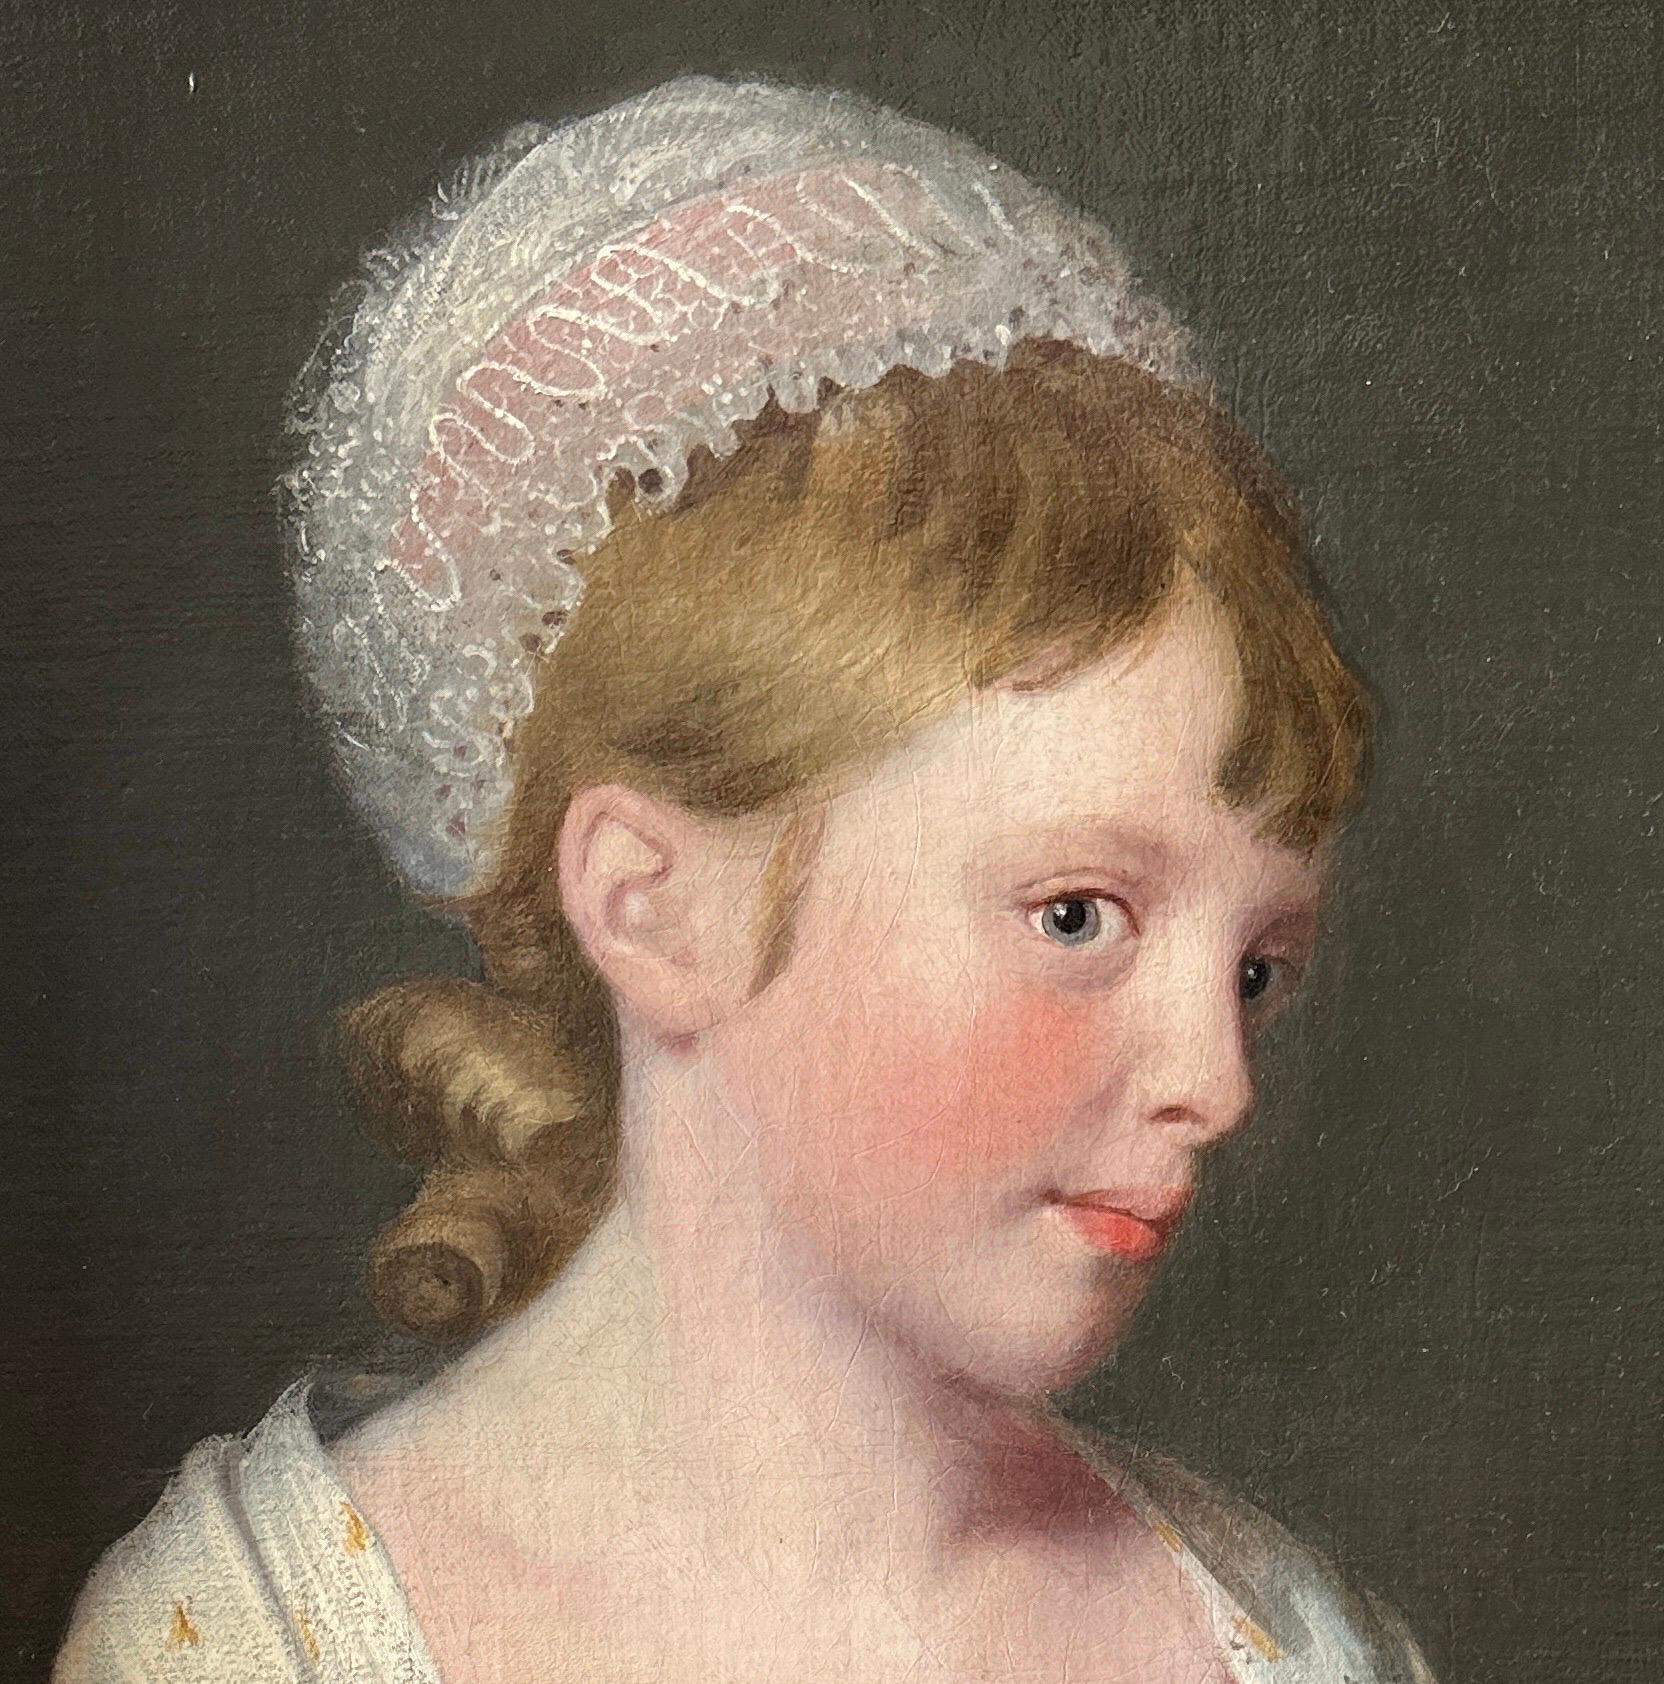 18th century portrait of a young girl in a bonnet and patterned shawl - English School Painting by Tilly Kettle